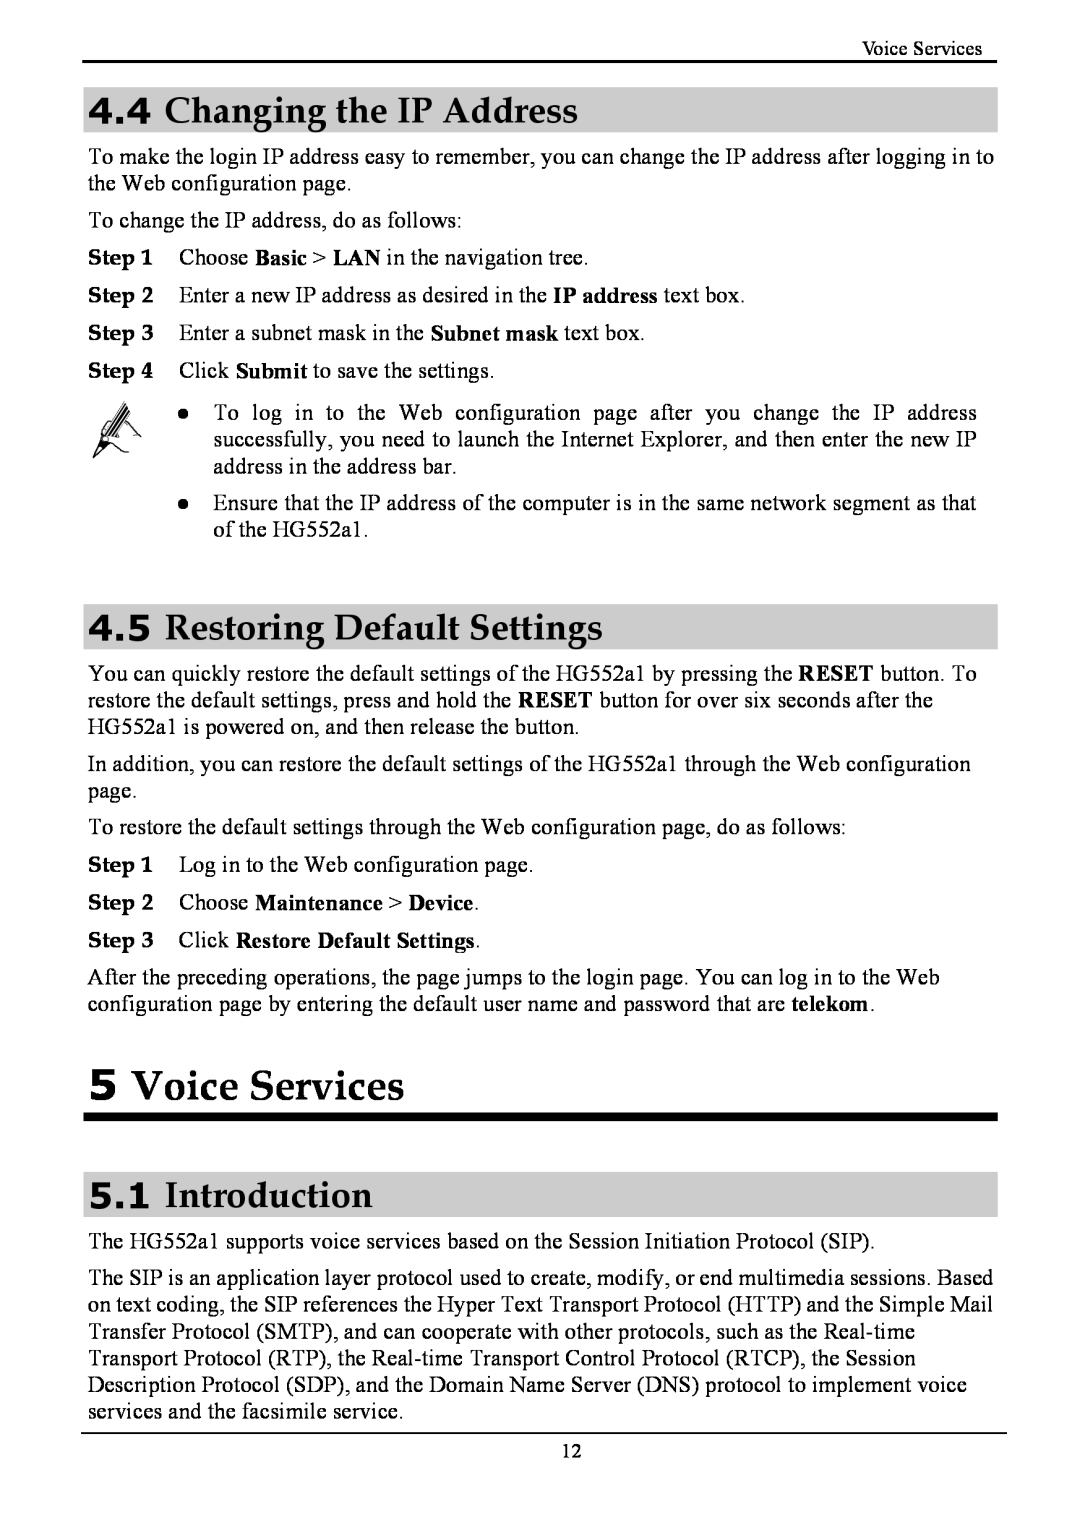 Huawei HG552a1 manual Voice Services, Changing the IP Address, Restoring Default Settings, Introduction 